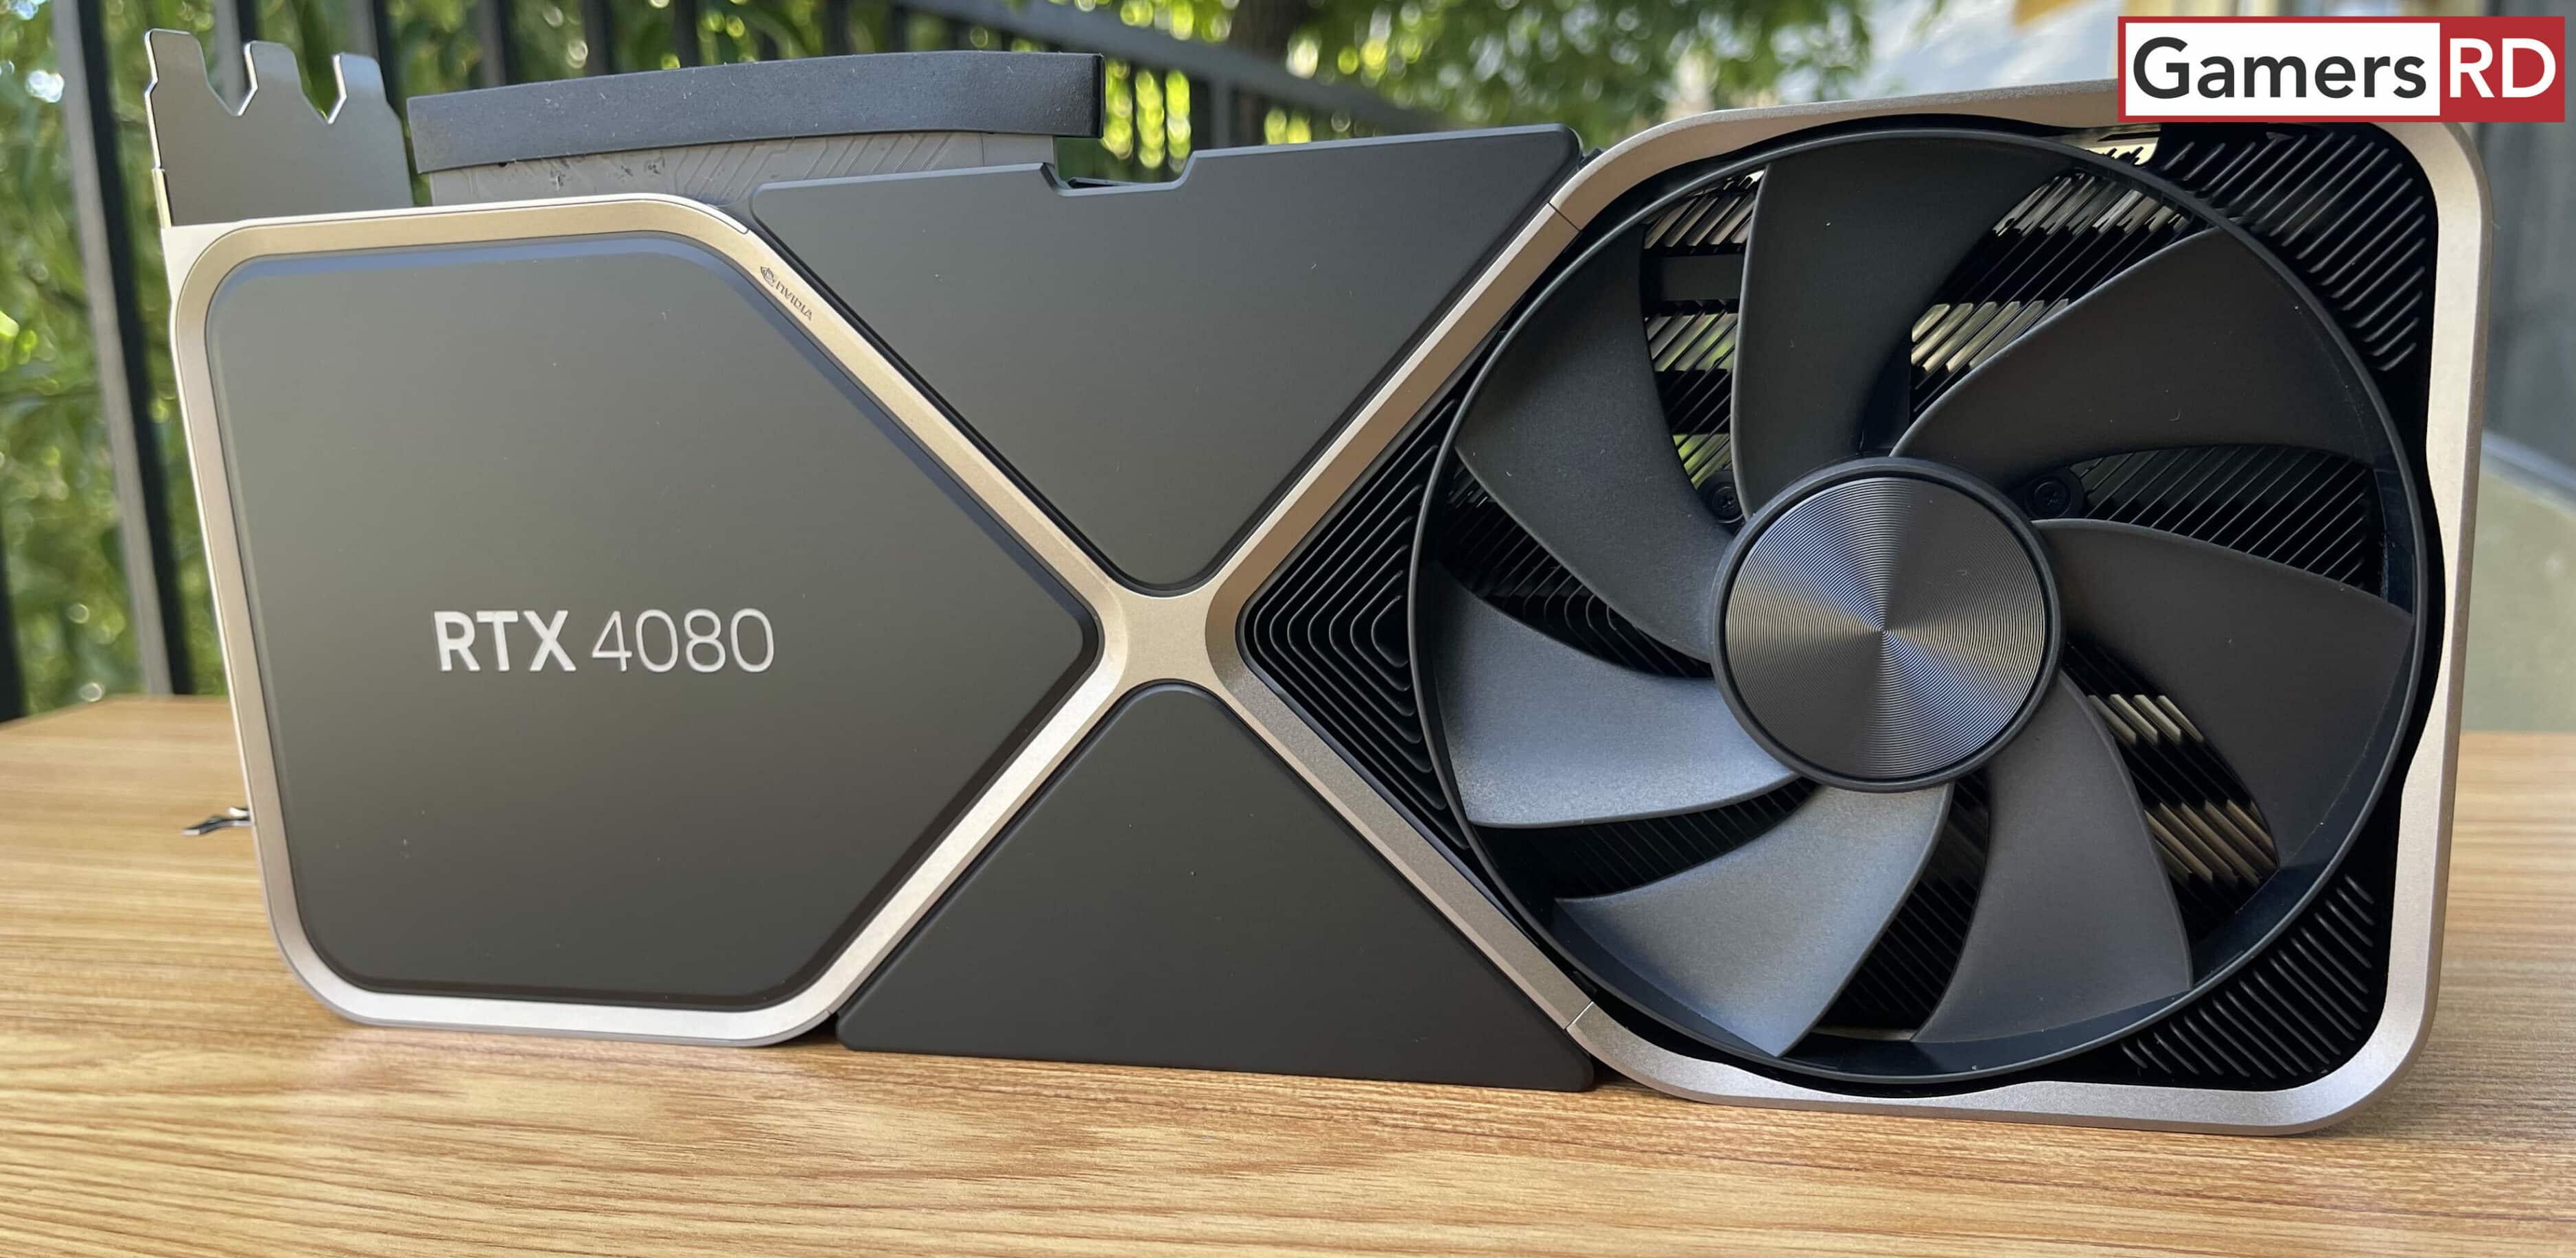 NVIDIA GeForce RTX 4080 FE Review GamersRD9